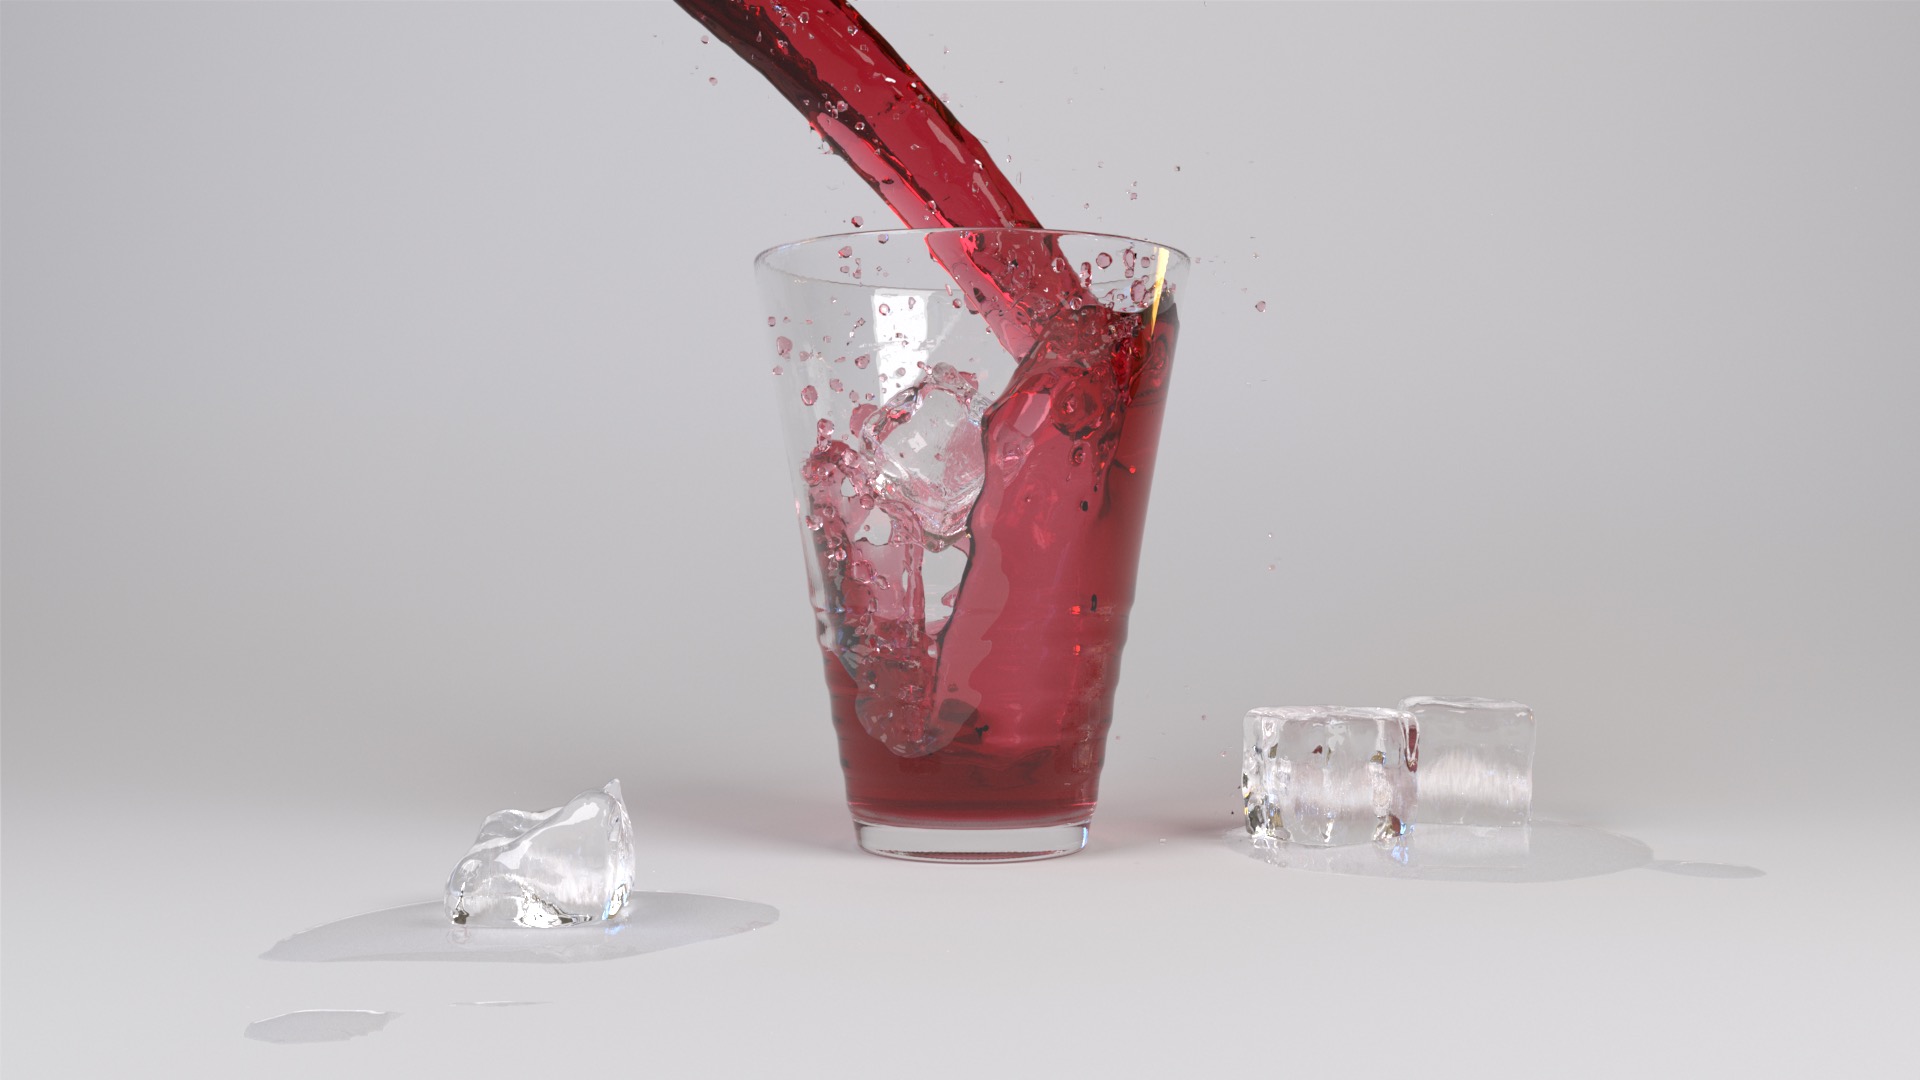 Figure 7: Cranberry juice pouring into a glass with ice cubes, rendered using Takua's priority-based nested dielectrics. The scene is from Benedikt Bitterli's rendering resources page.